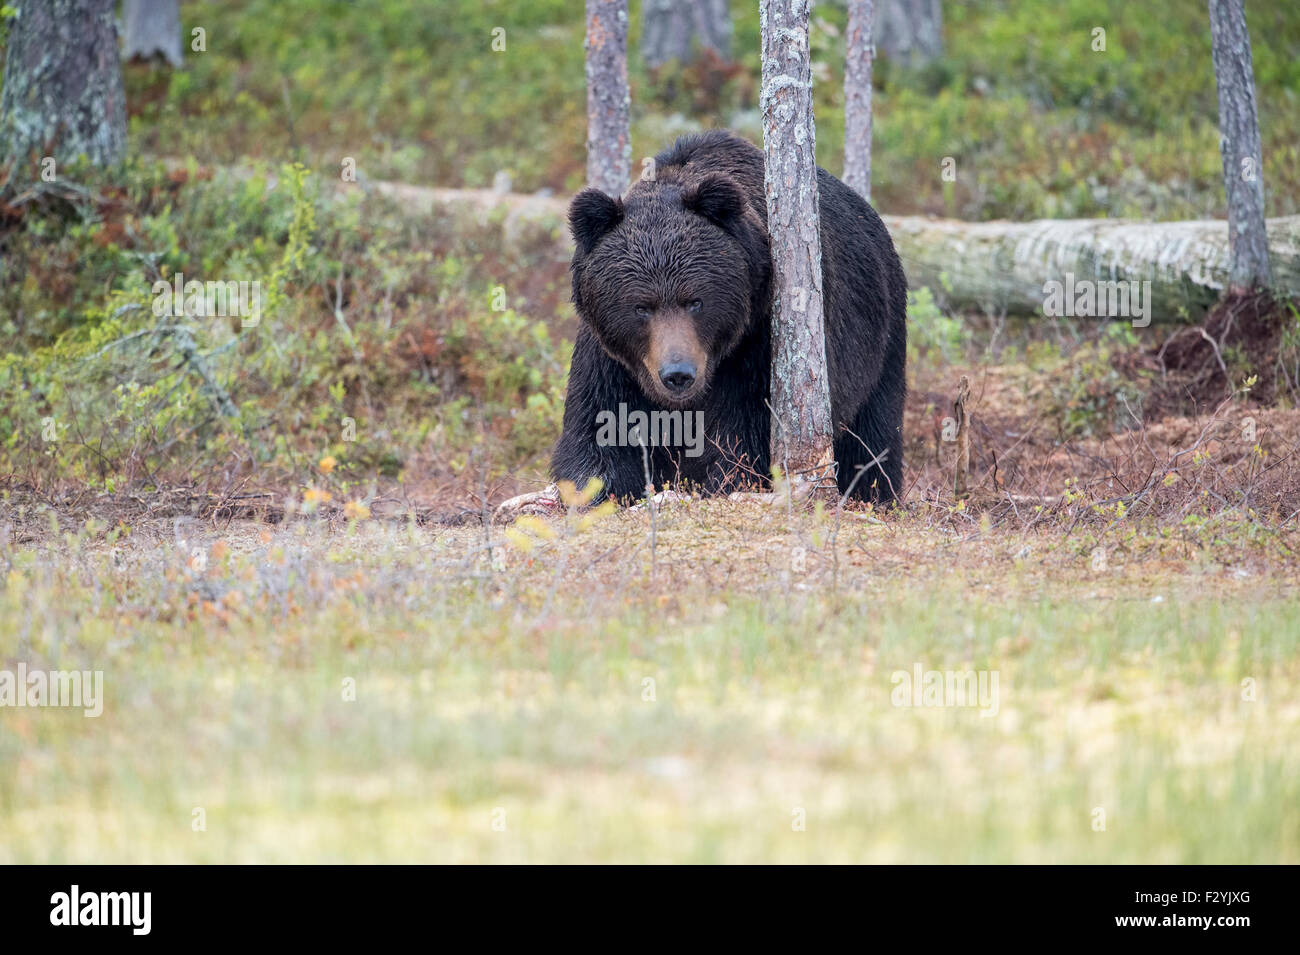 Eurasian Brown Bear Ursus arctos arctos emerges from the wild forests of Finland, close to the Russian border. Stock Photo